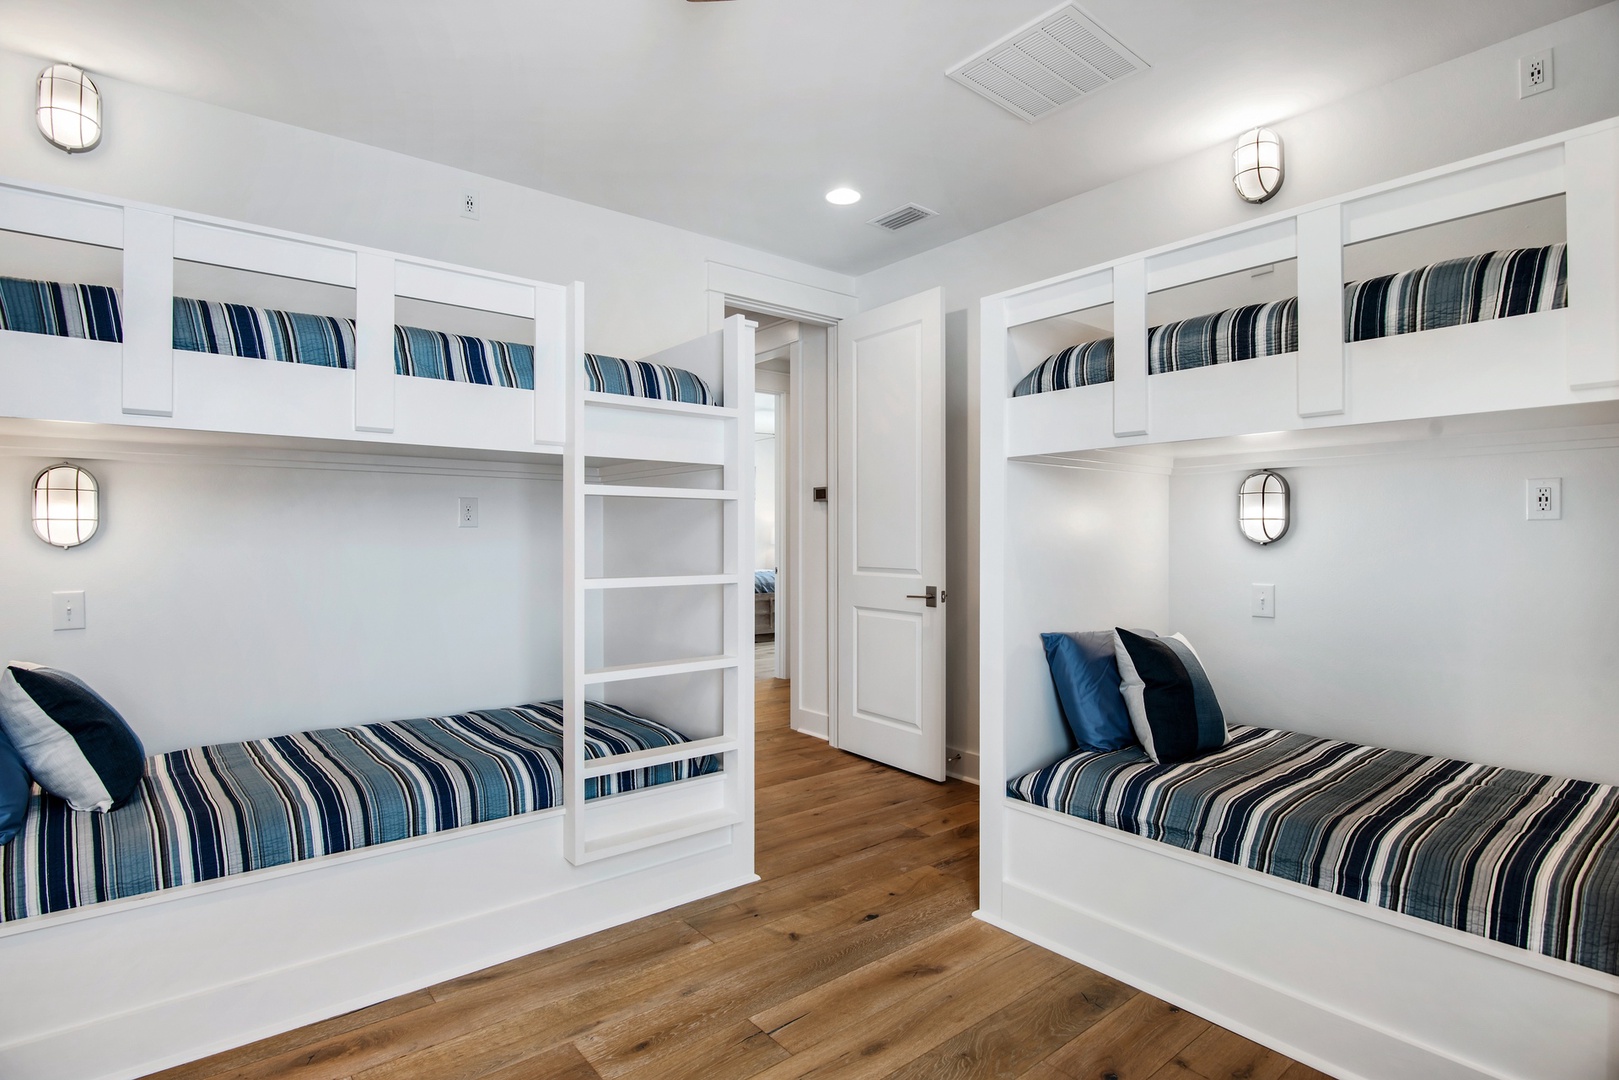 The bunk room offers nautical finishes, and great reading spaces for kids and adults!